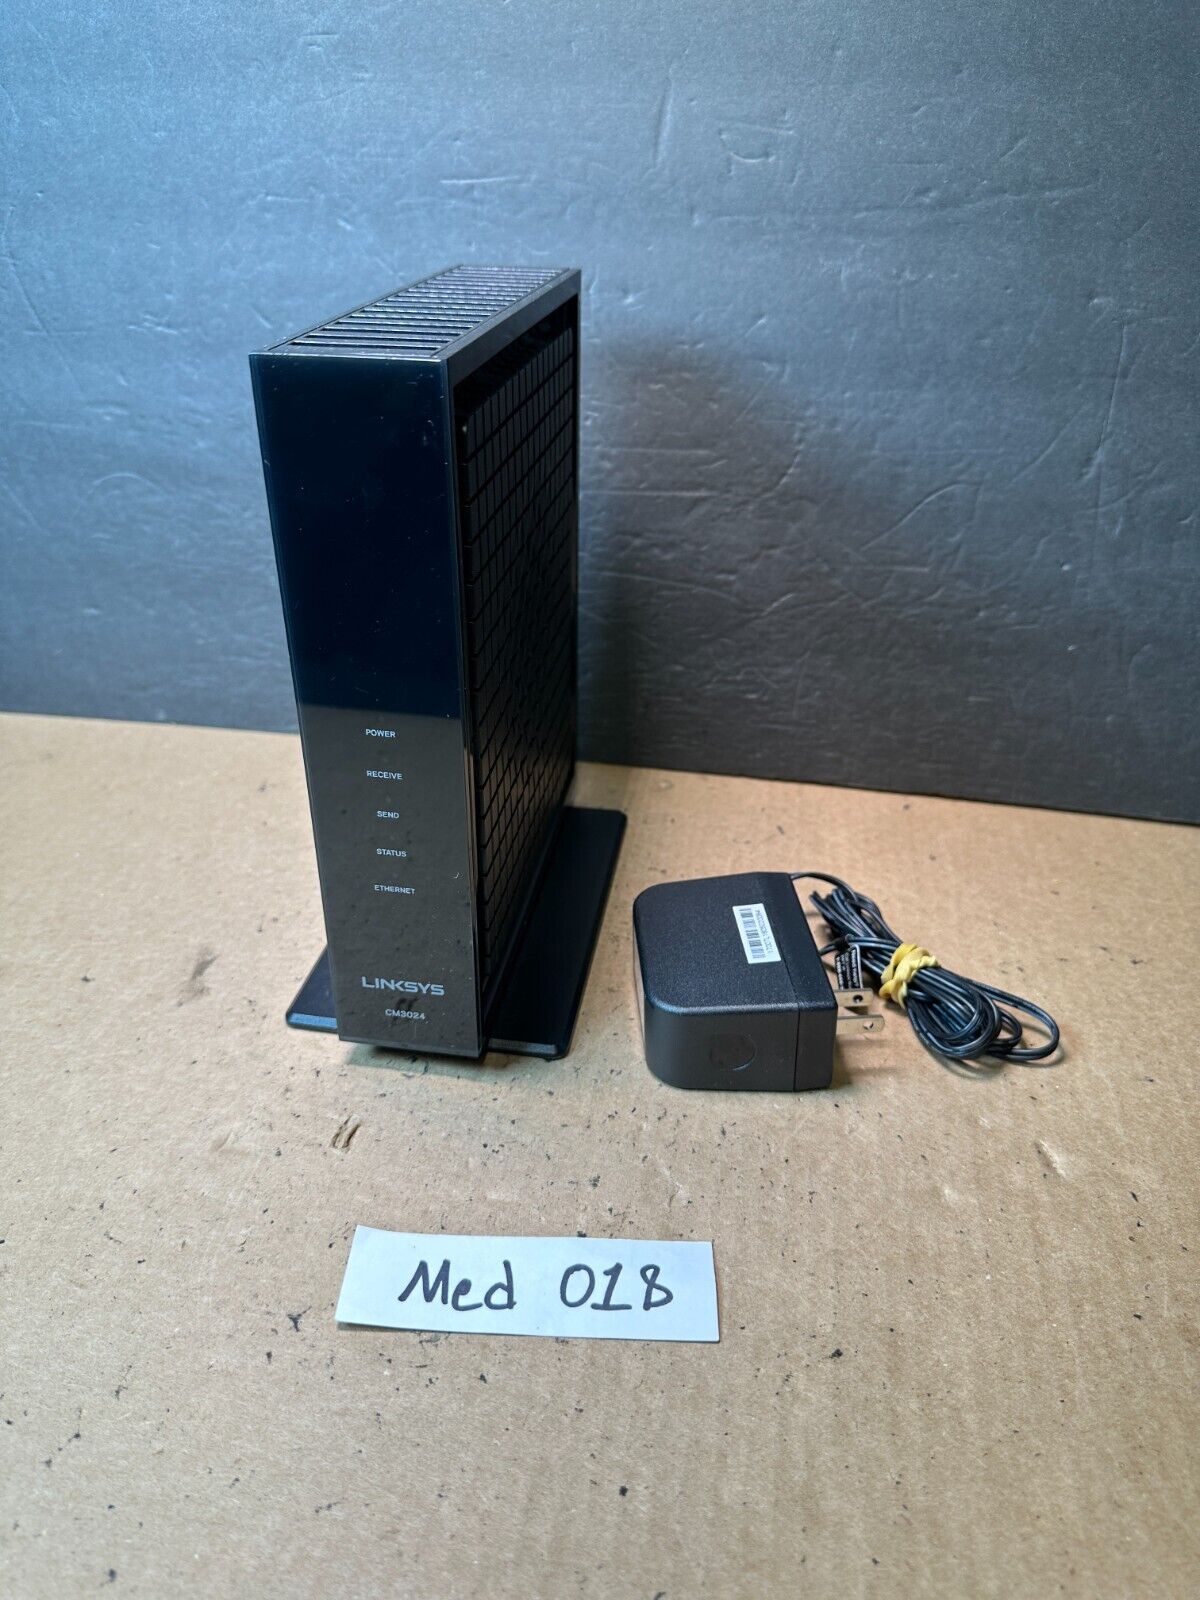 Linksys CM3024 24 X 8 Cable Modem Docsis 3.0 Intel With Adapter Used